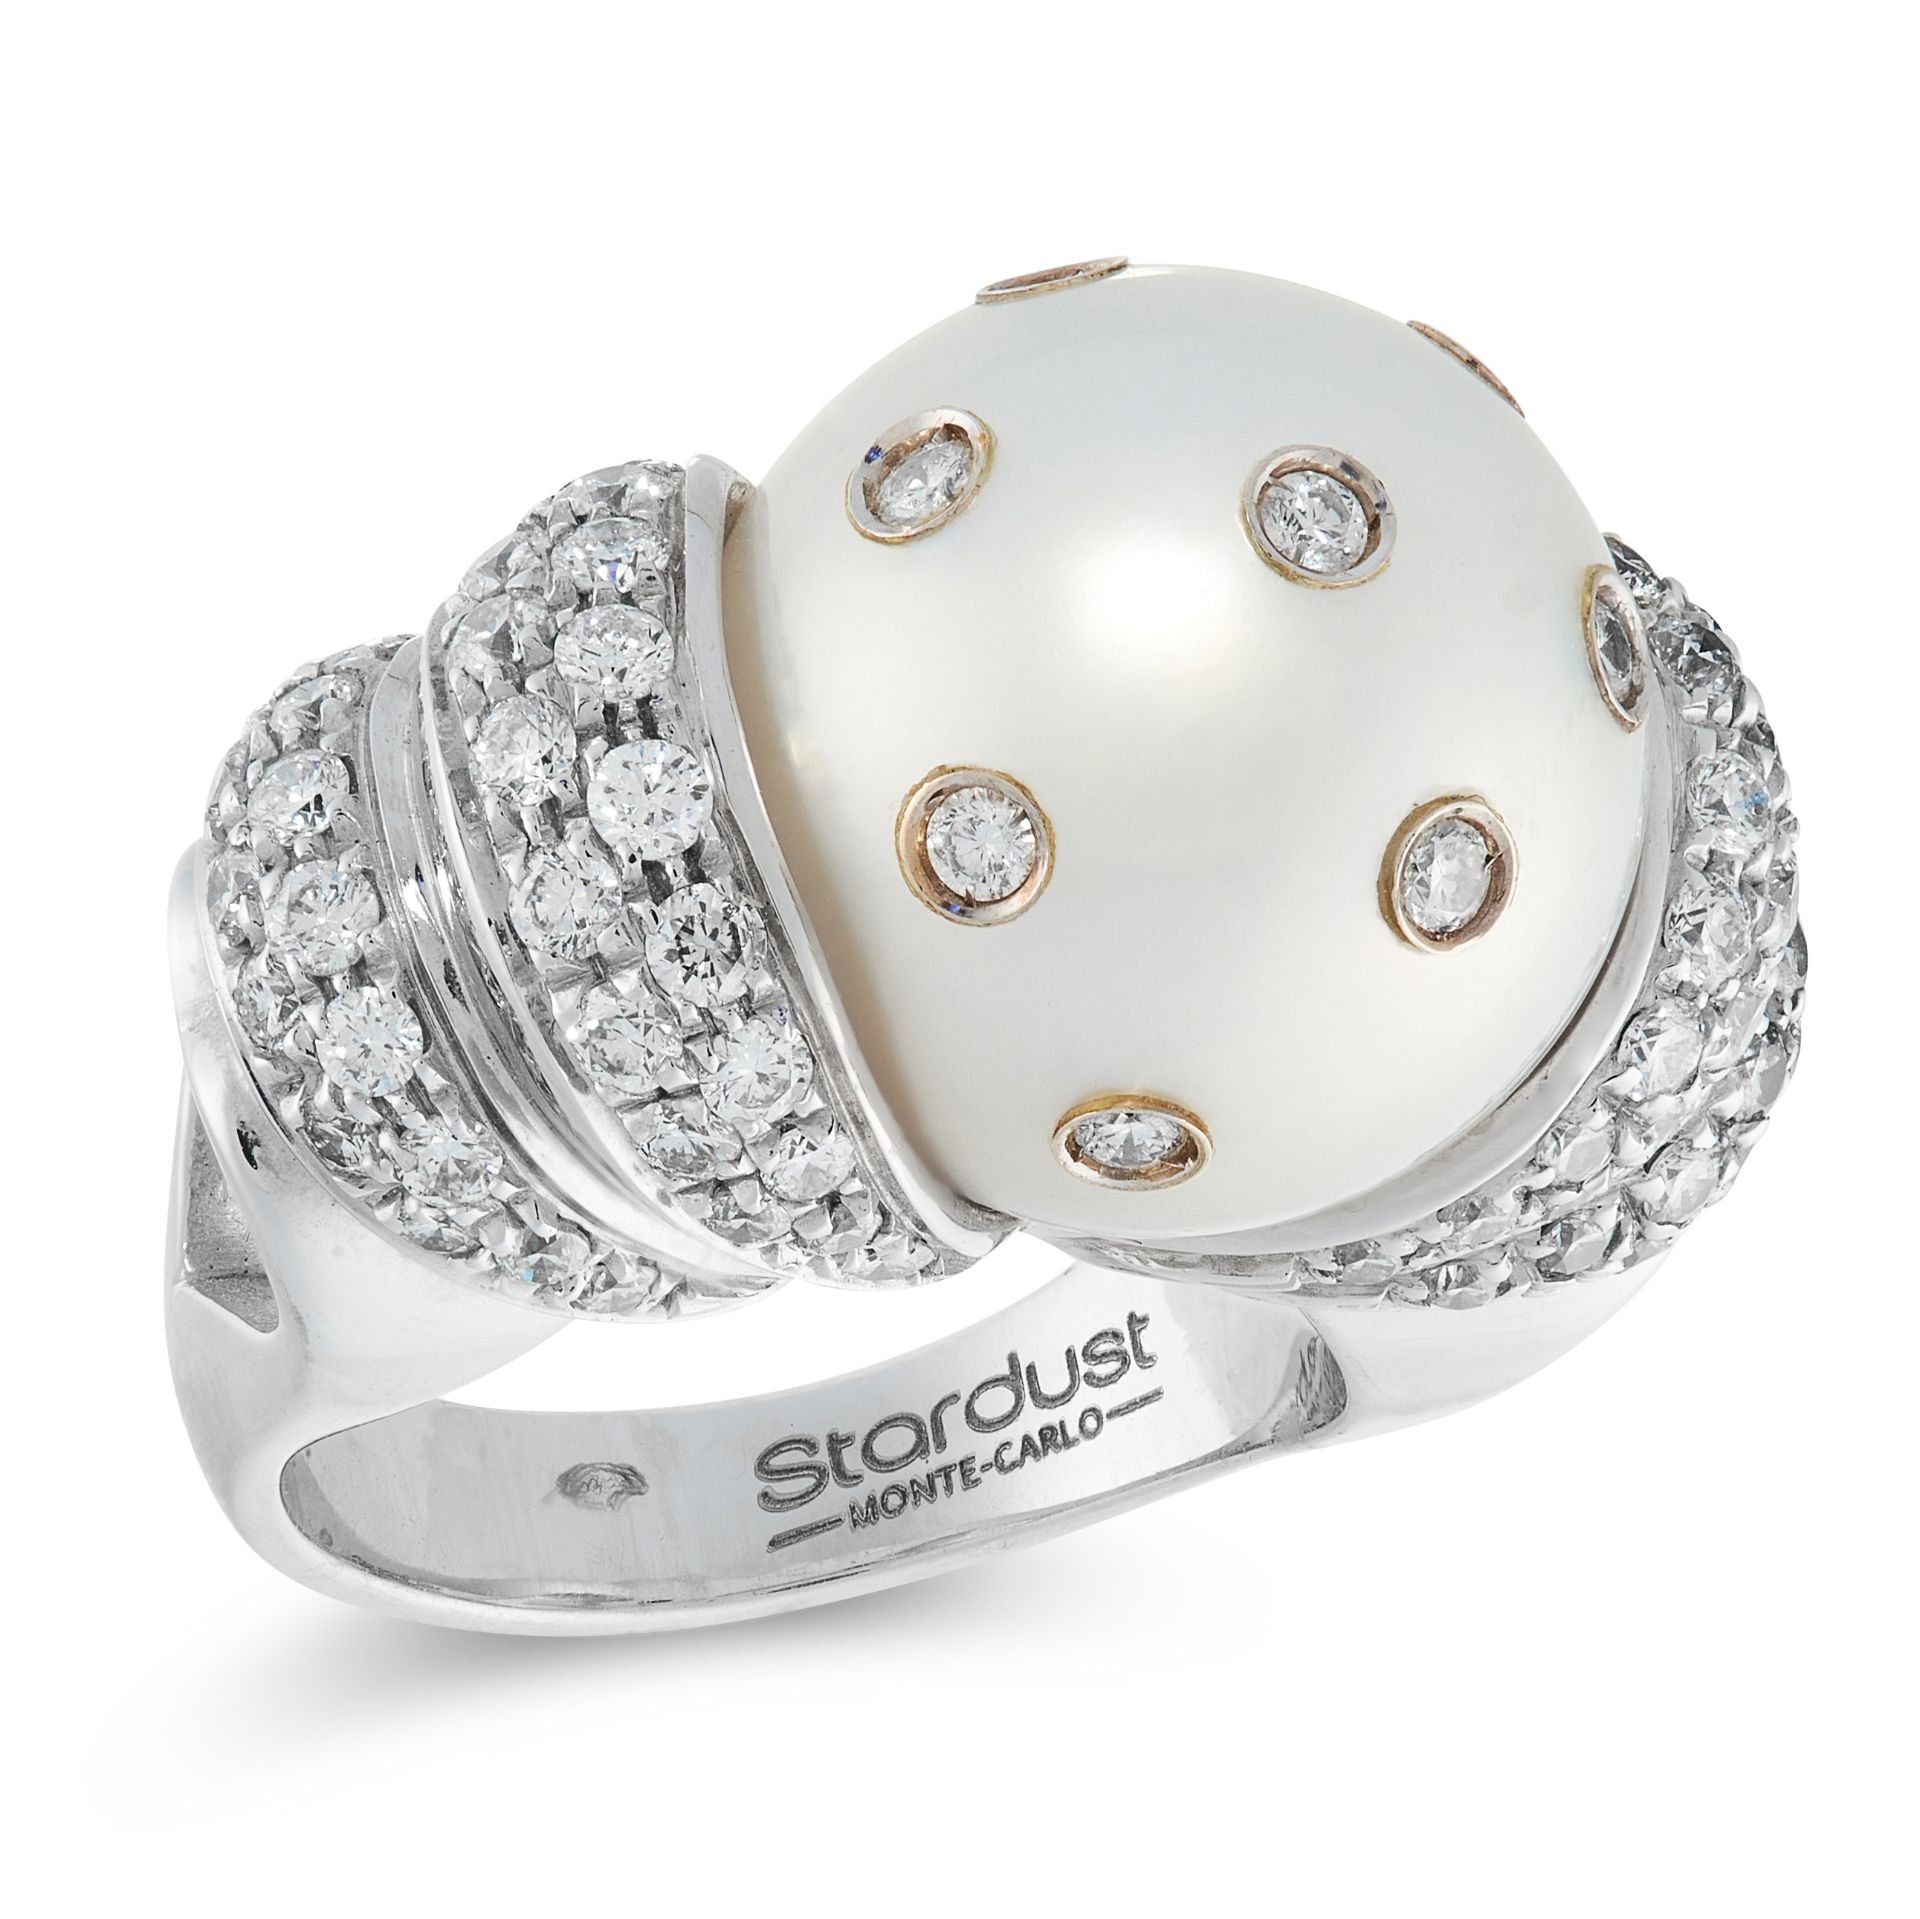 A SOUTH SEA PEARL AND DIAMOND DRESS RING in 18ct white gold, set with a central south sea pearl - Image 2 of 2